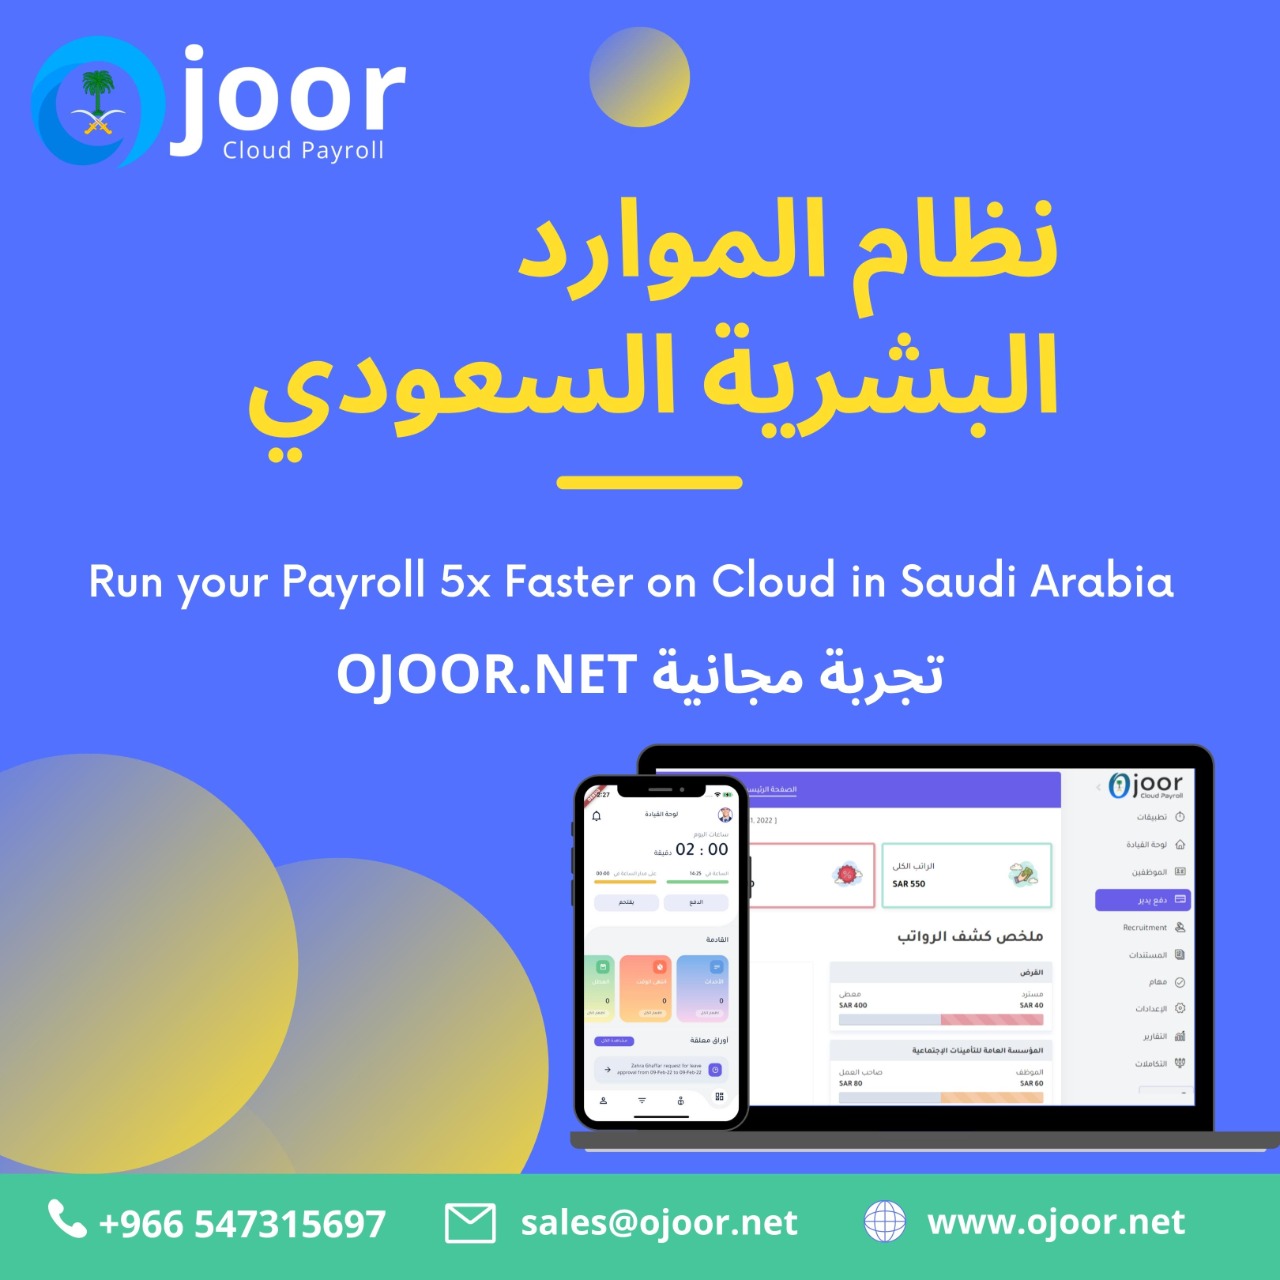 How to connect HR Software in Saudi Arabia to other systems?